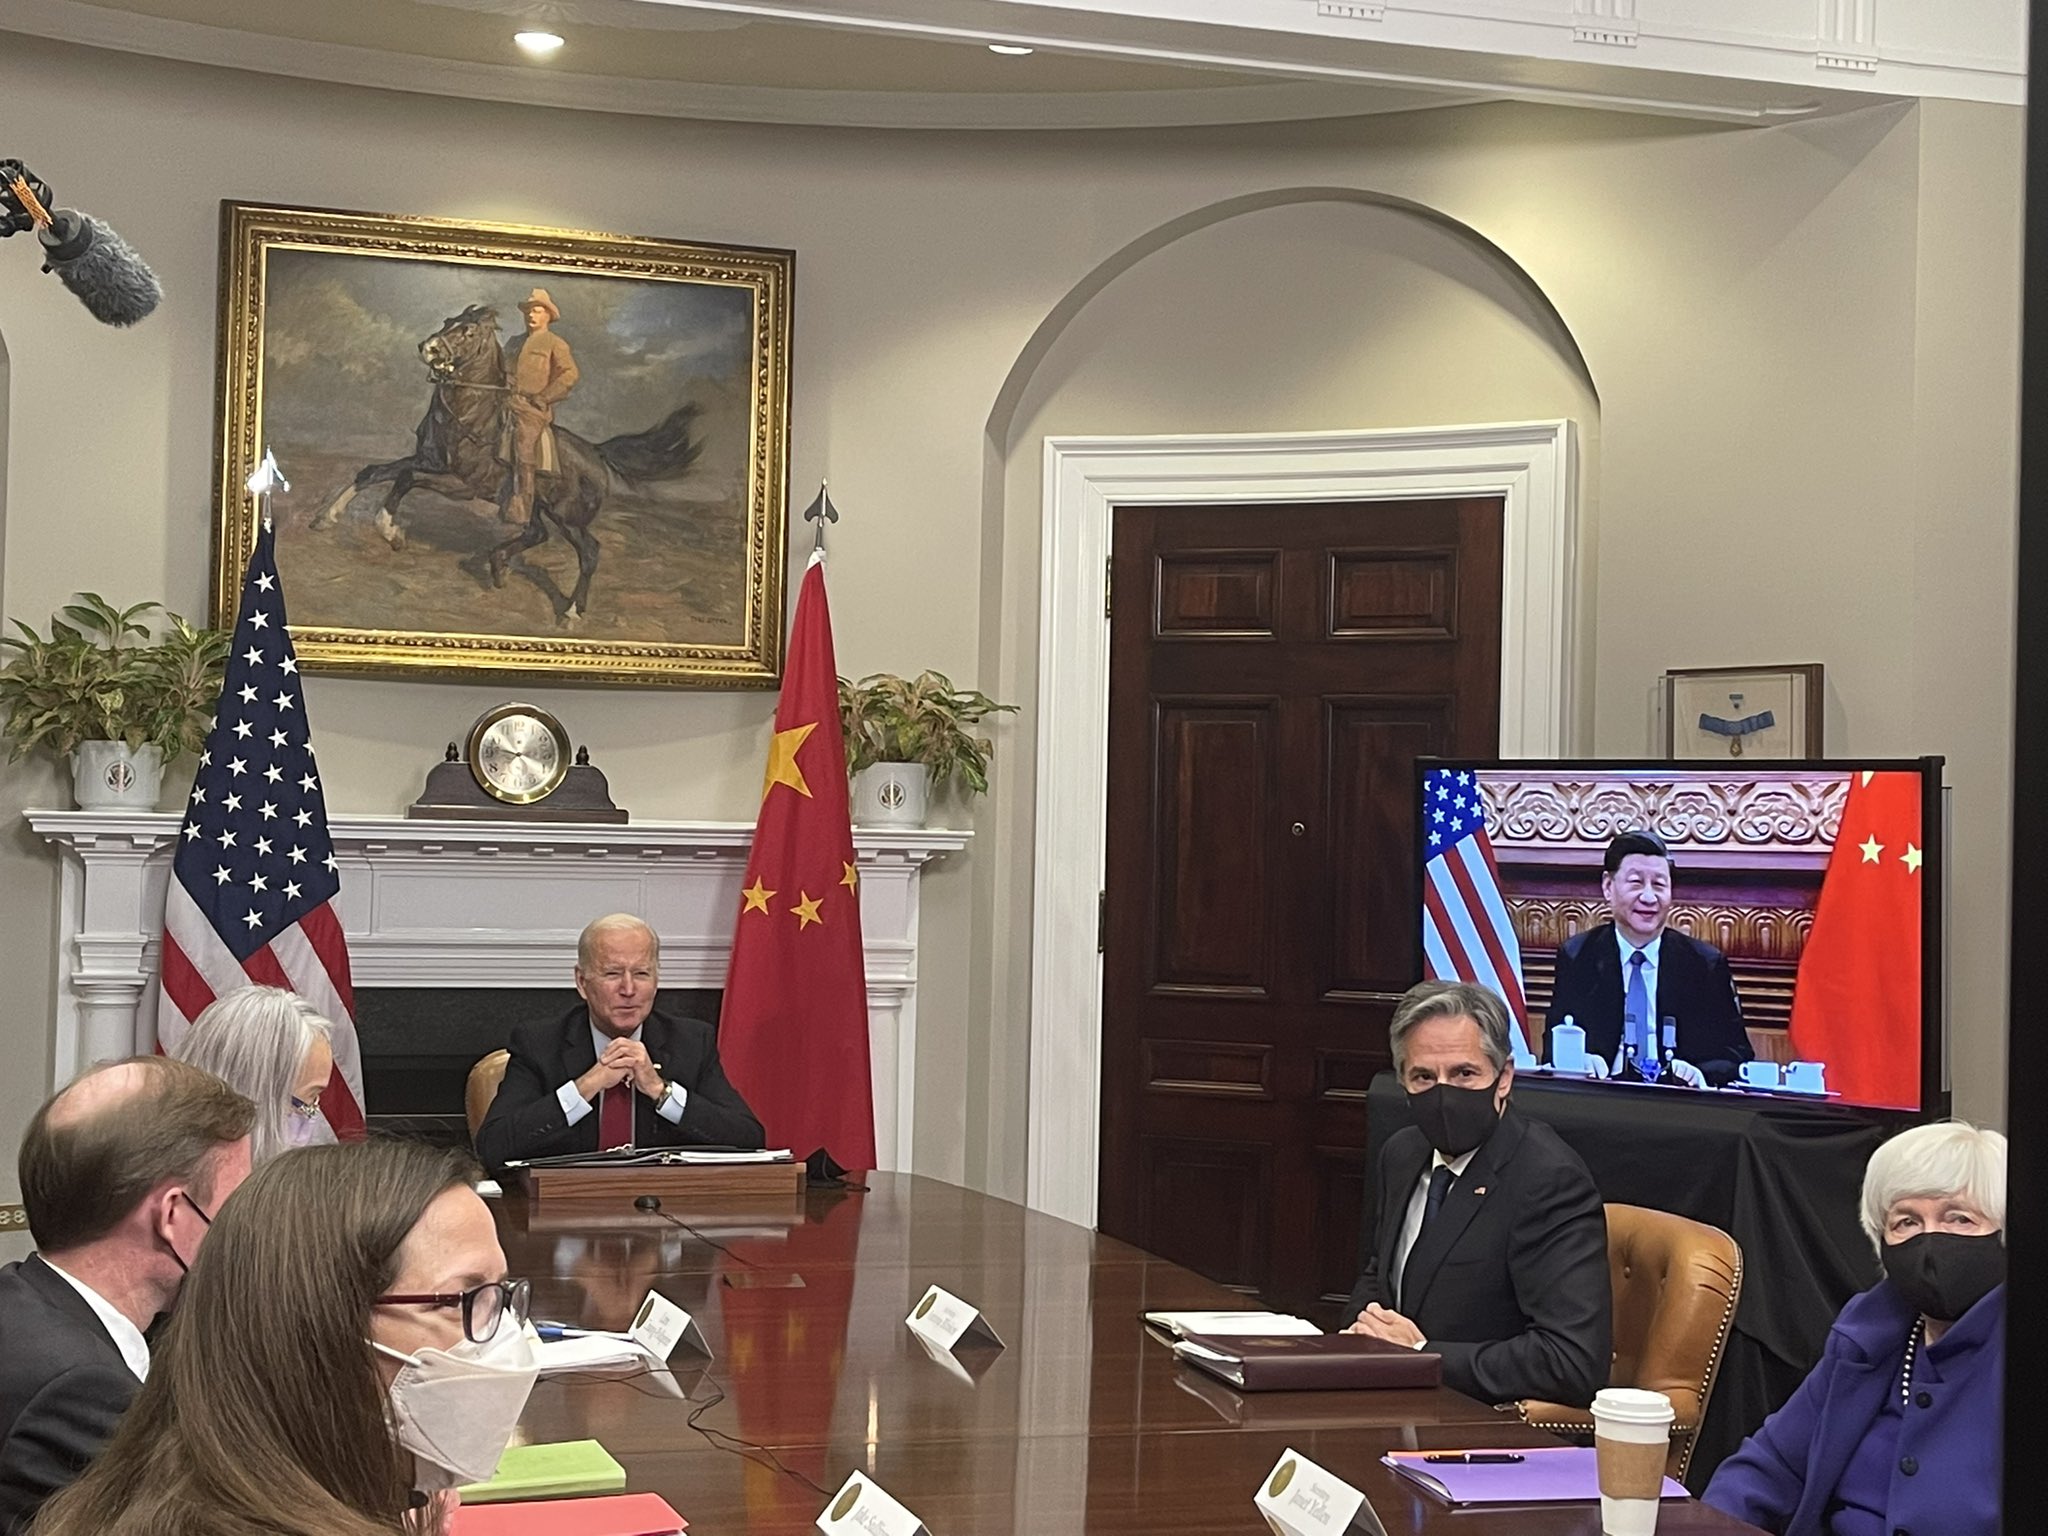 US President Joe Biden and other officials during a virtual meeting with Xi Jinping. (Pic courtesy: Meghan Hays, director message planning, WH)